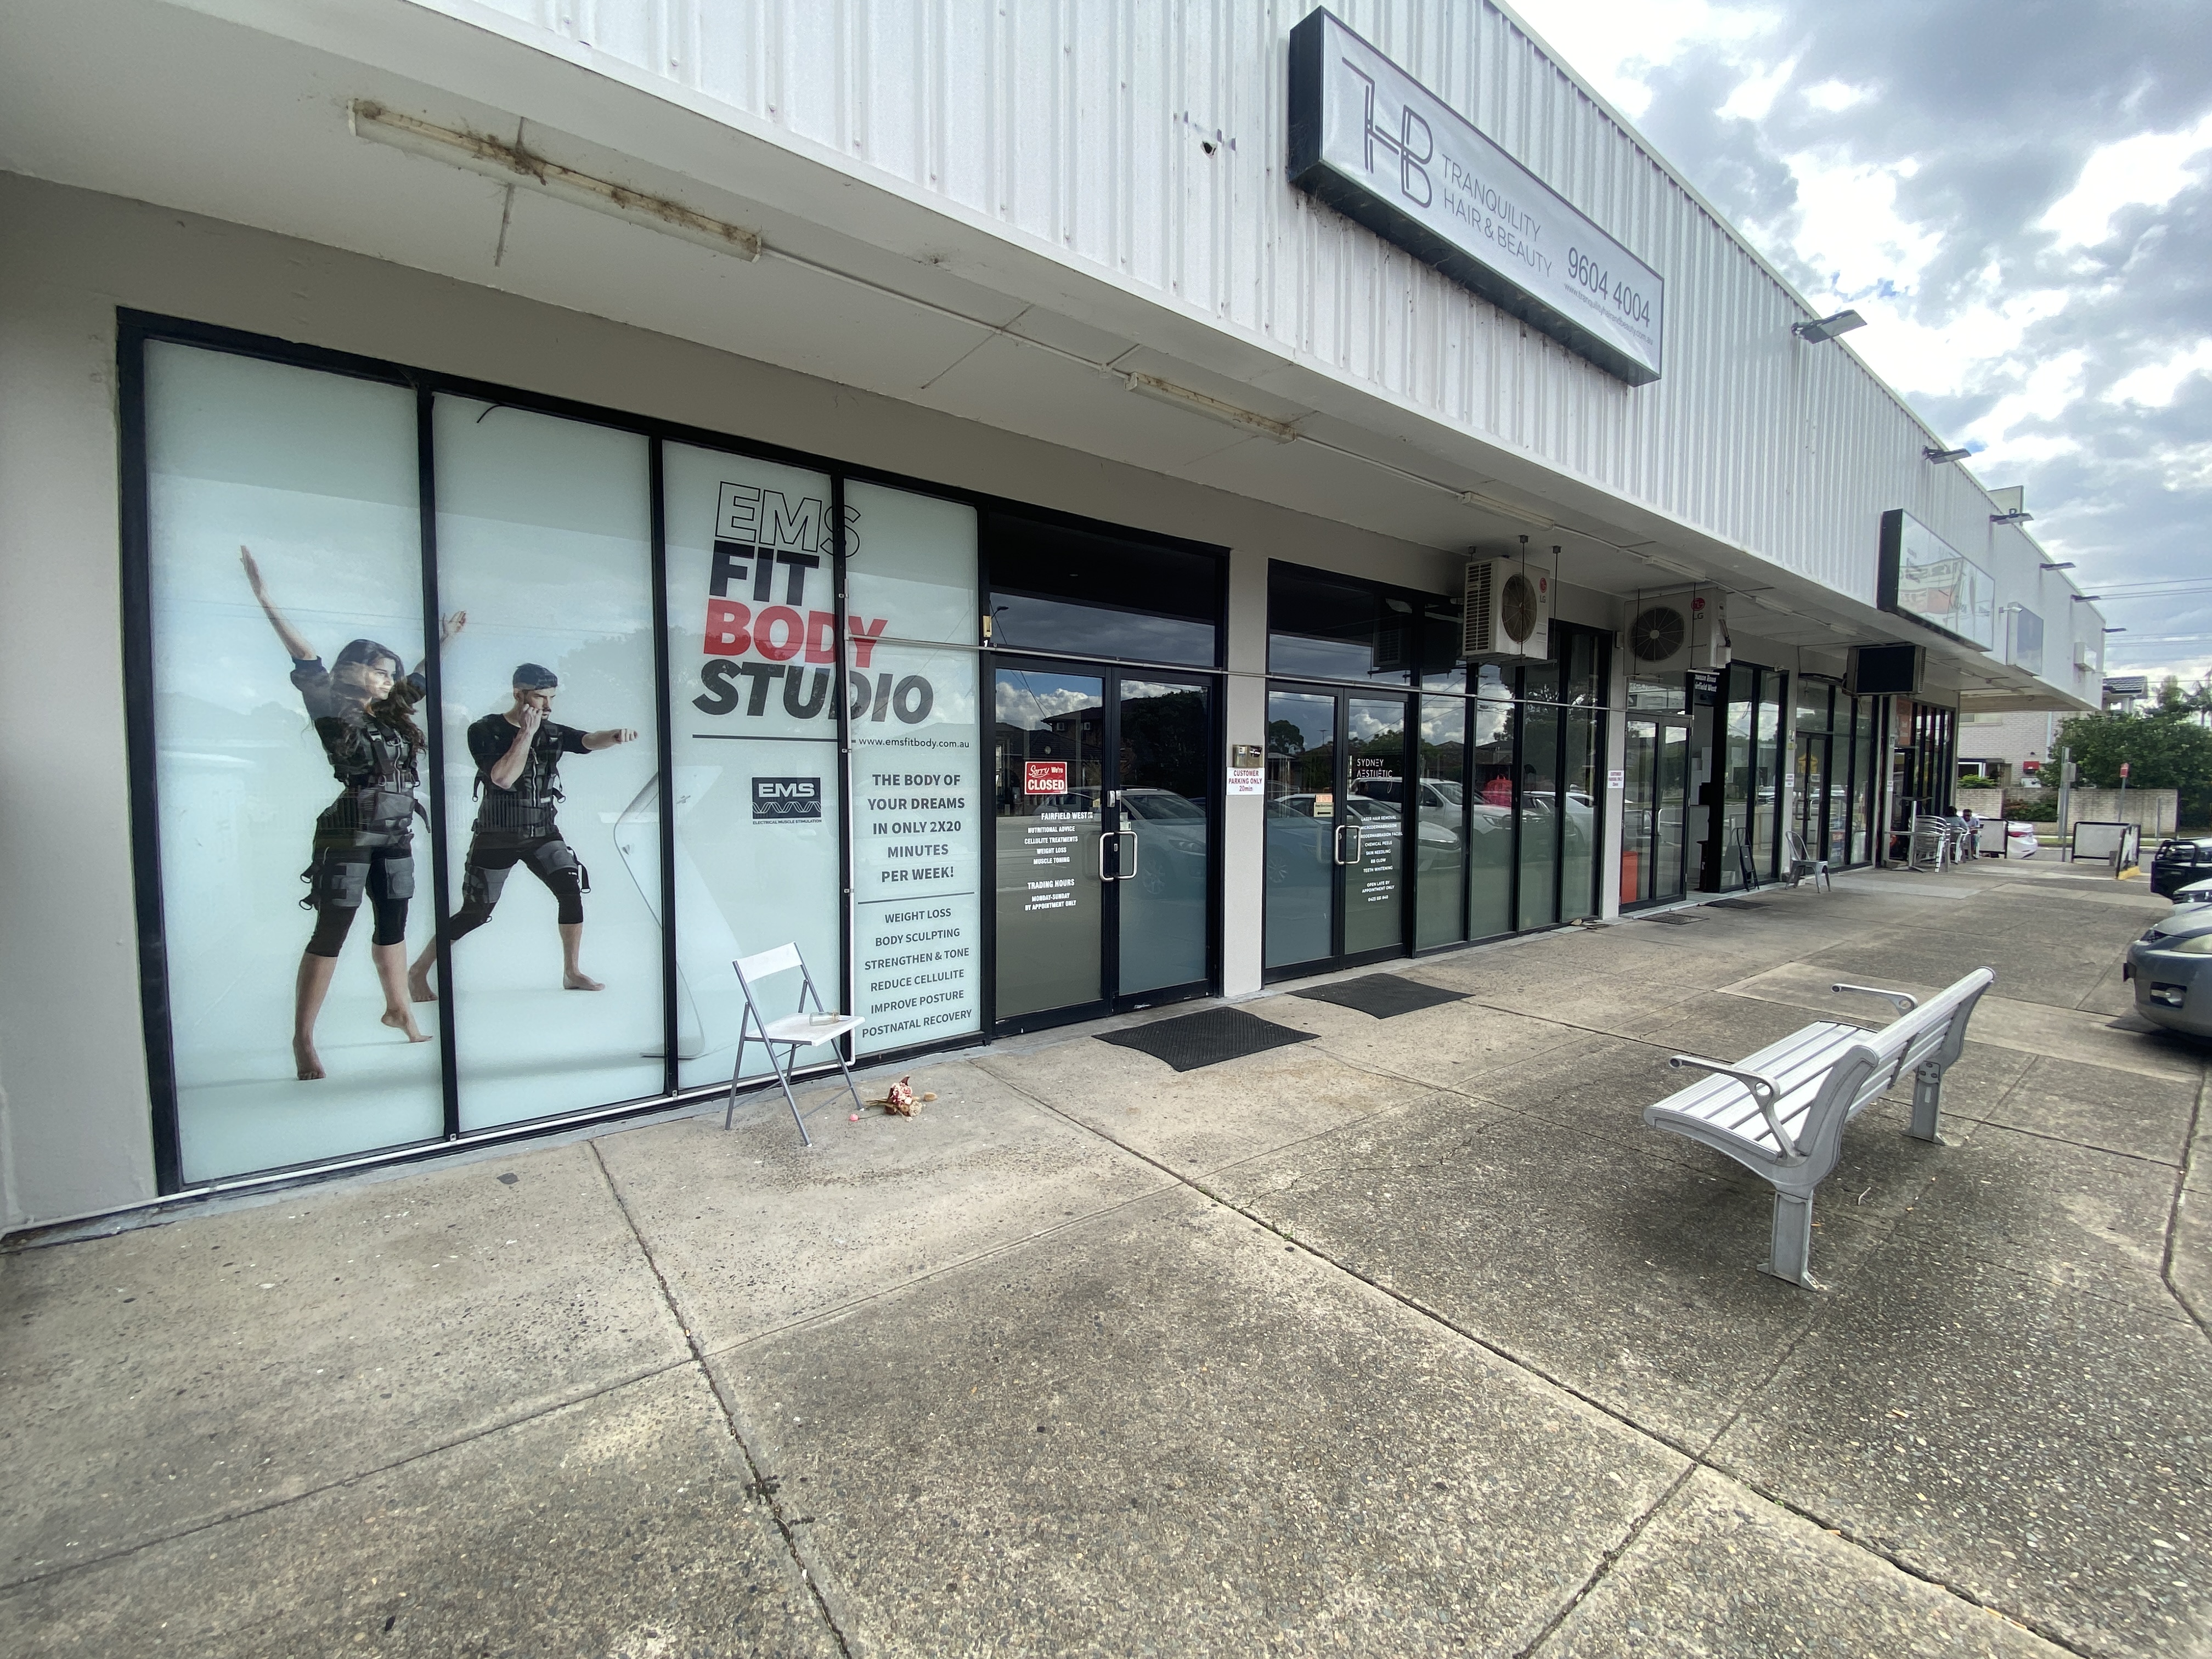 Retail property for lease in fairfield west 0